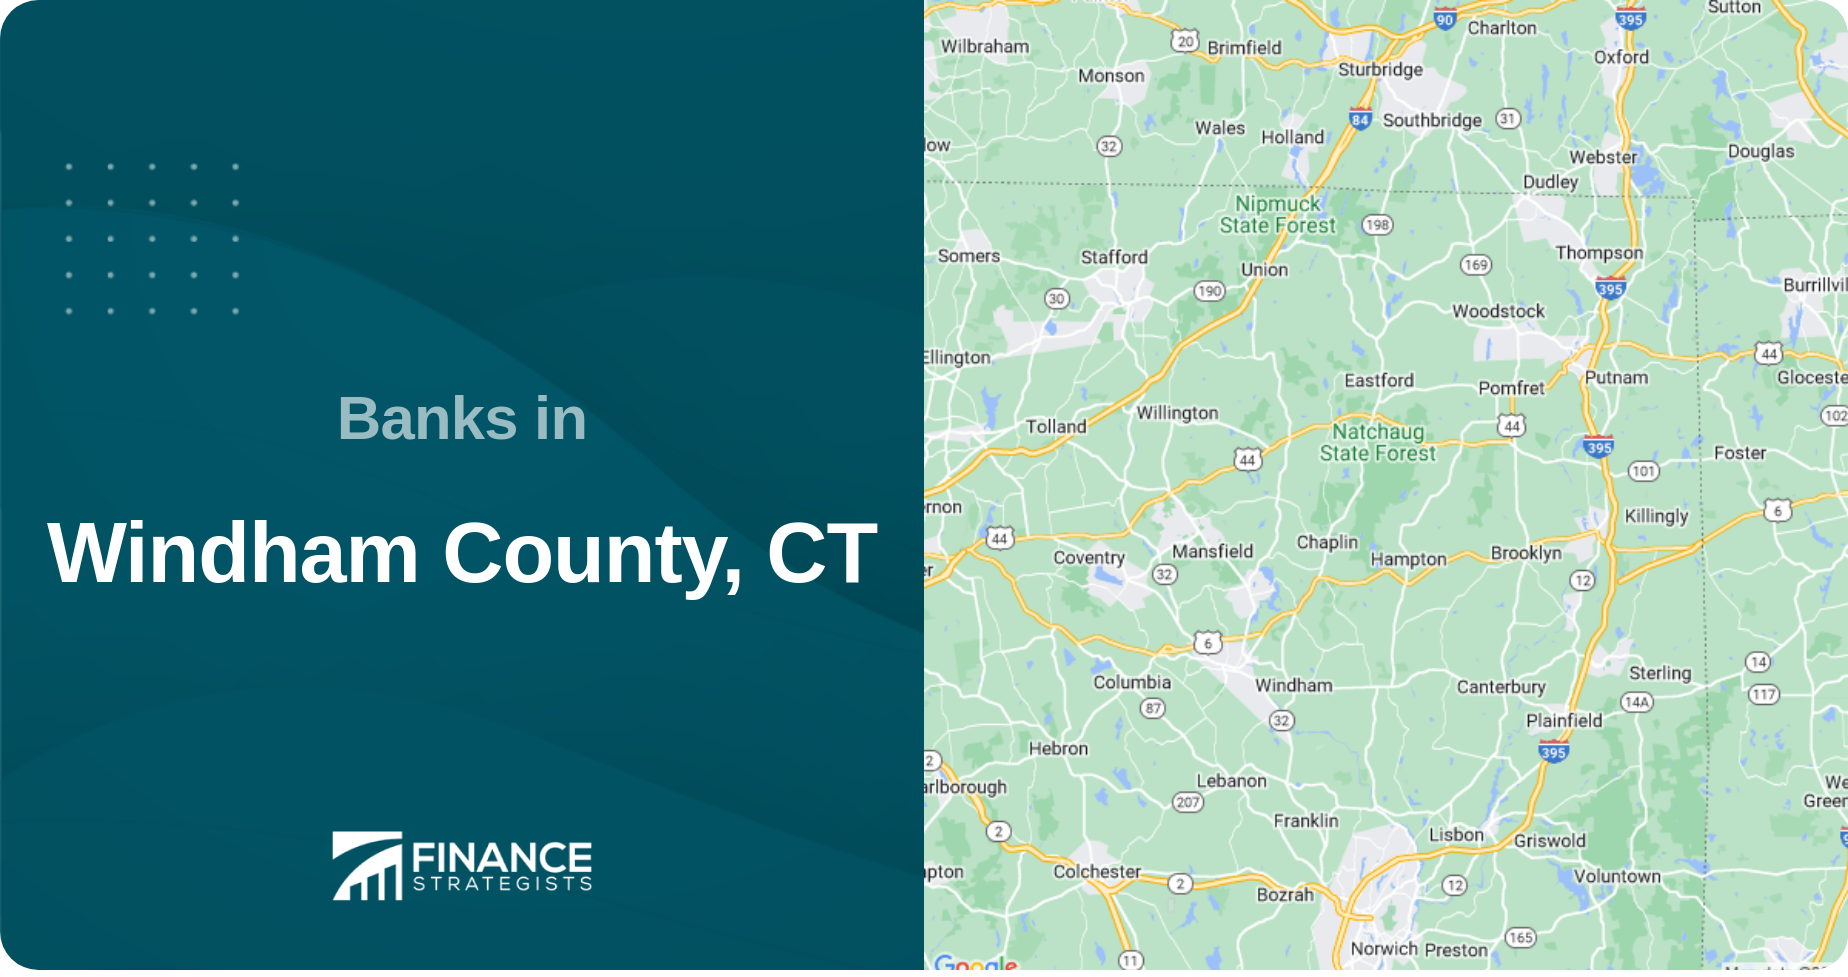 Banks in Windham County, CT